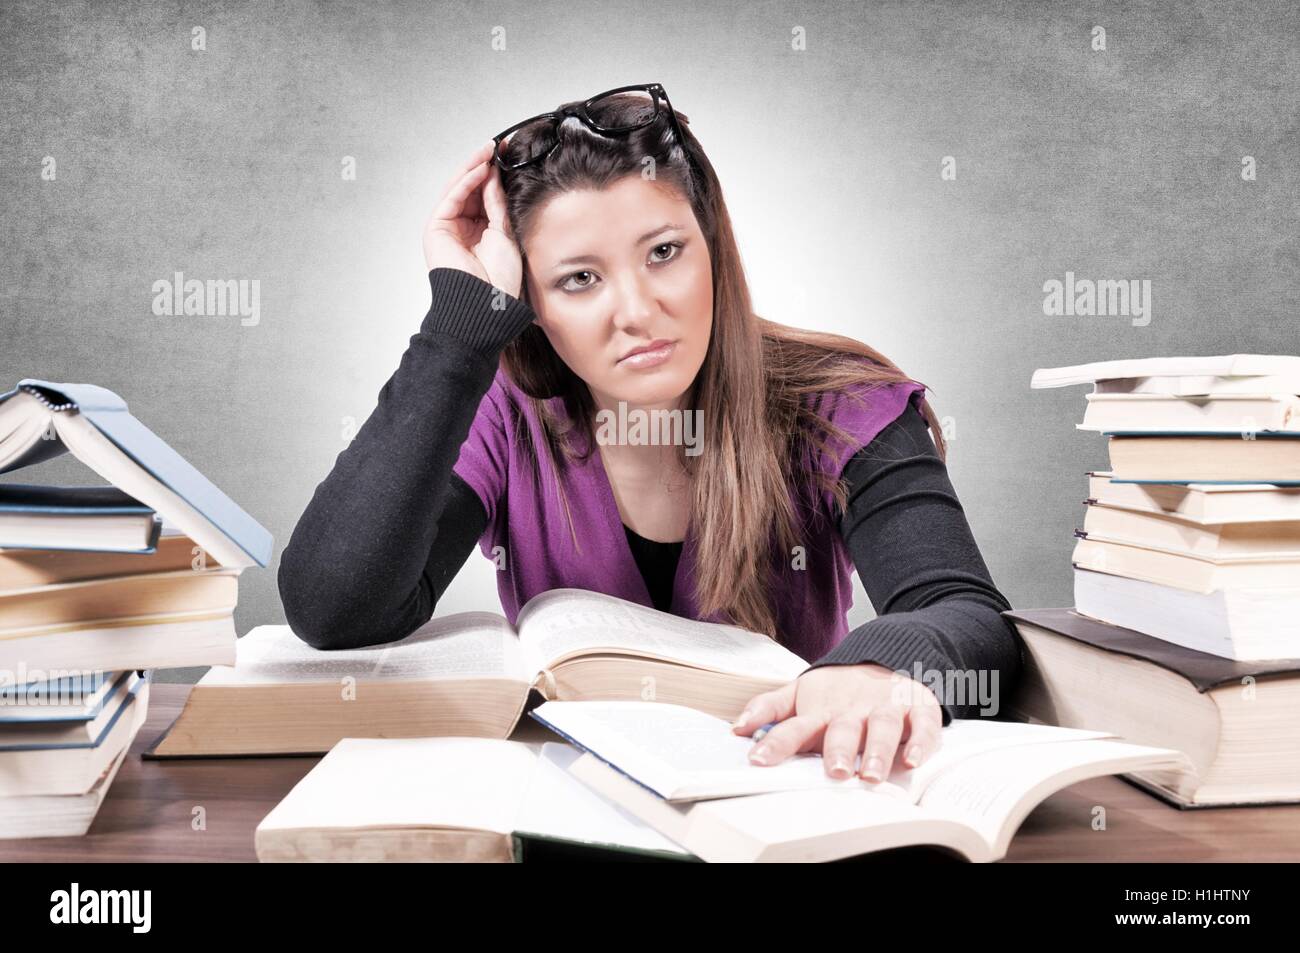 Contempt for learning Stock Photo